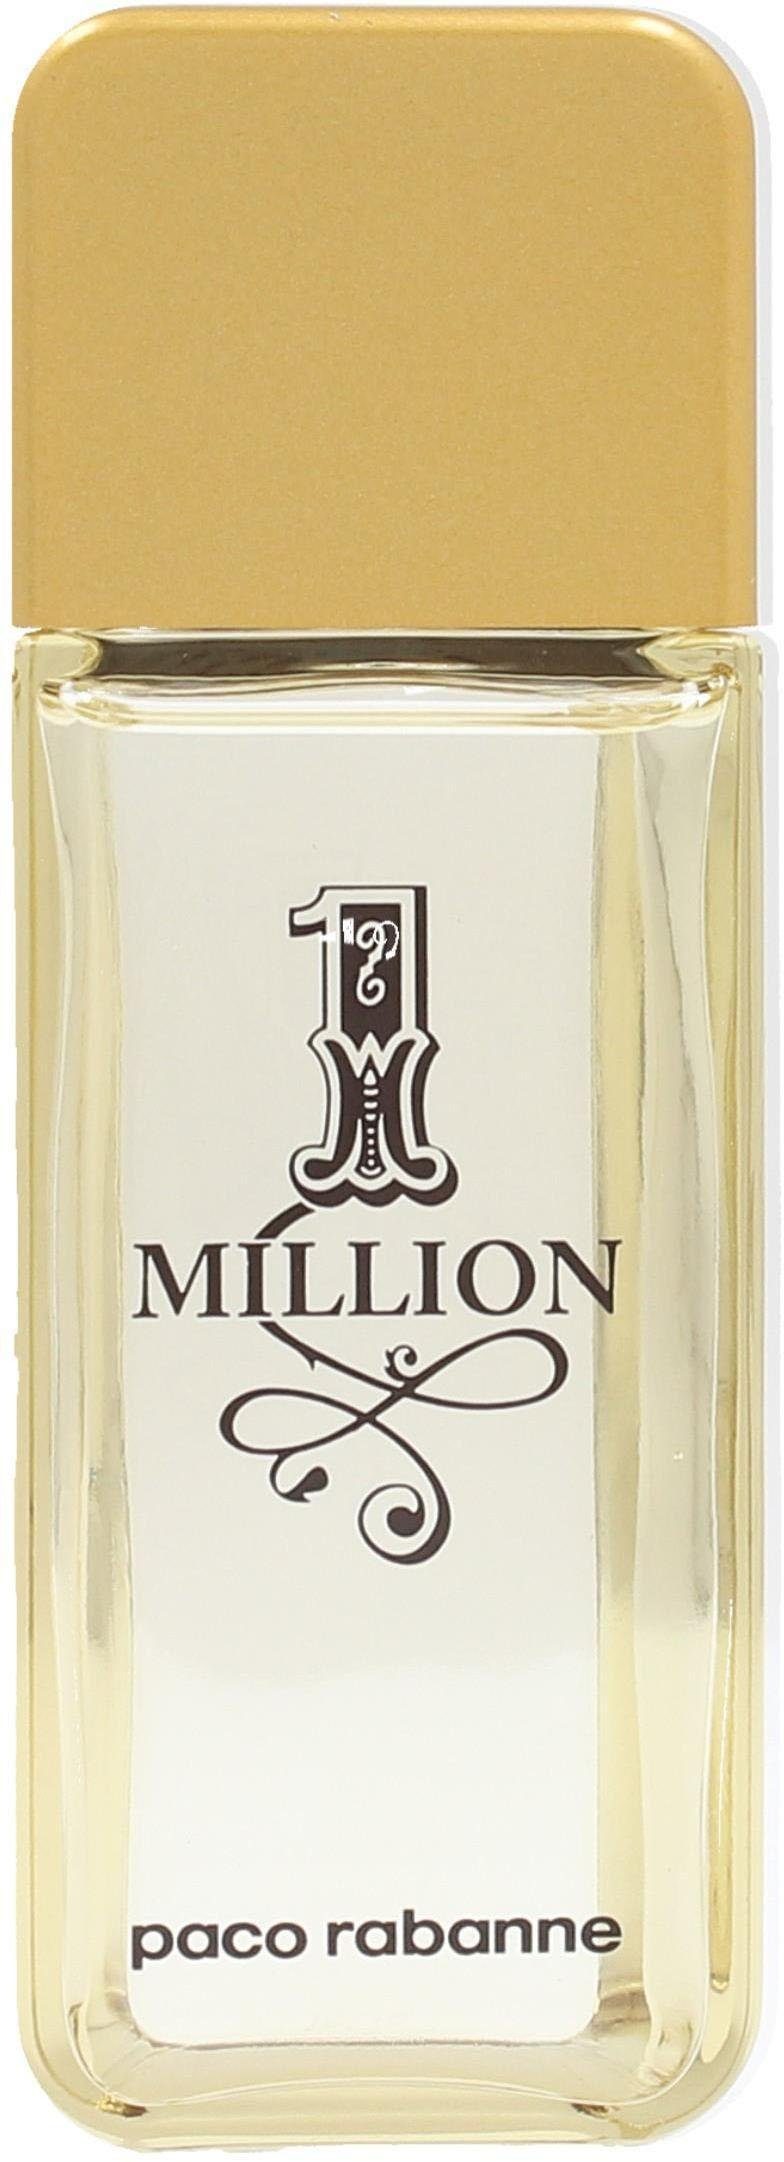 paco After-Shave Million 1 rabanne